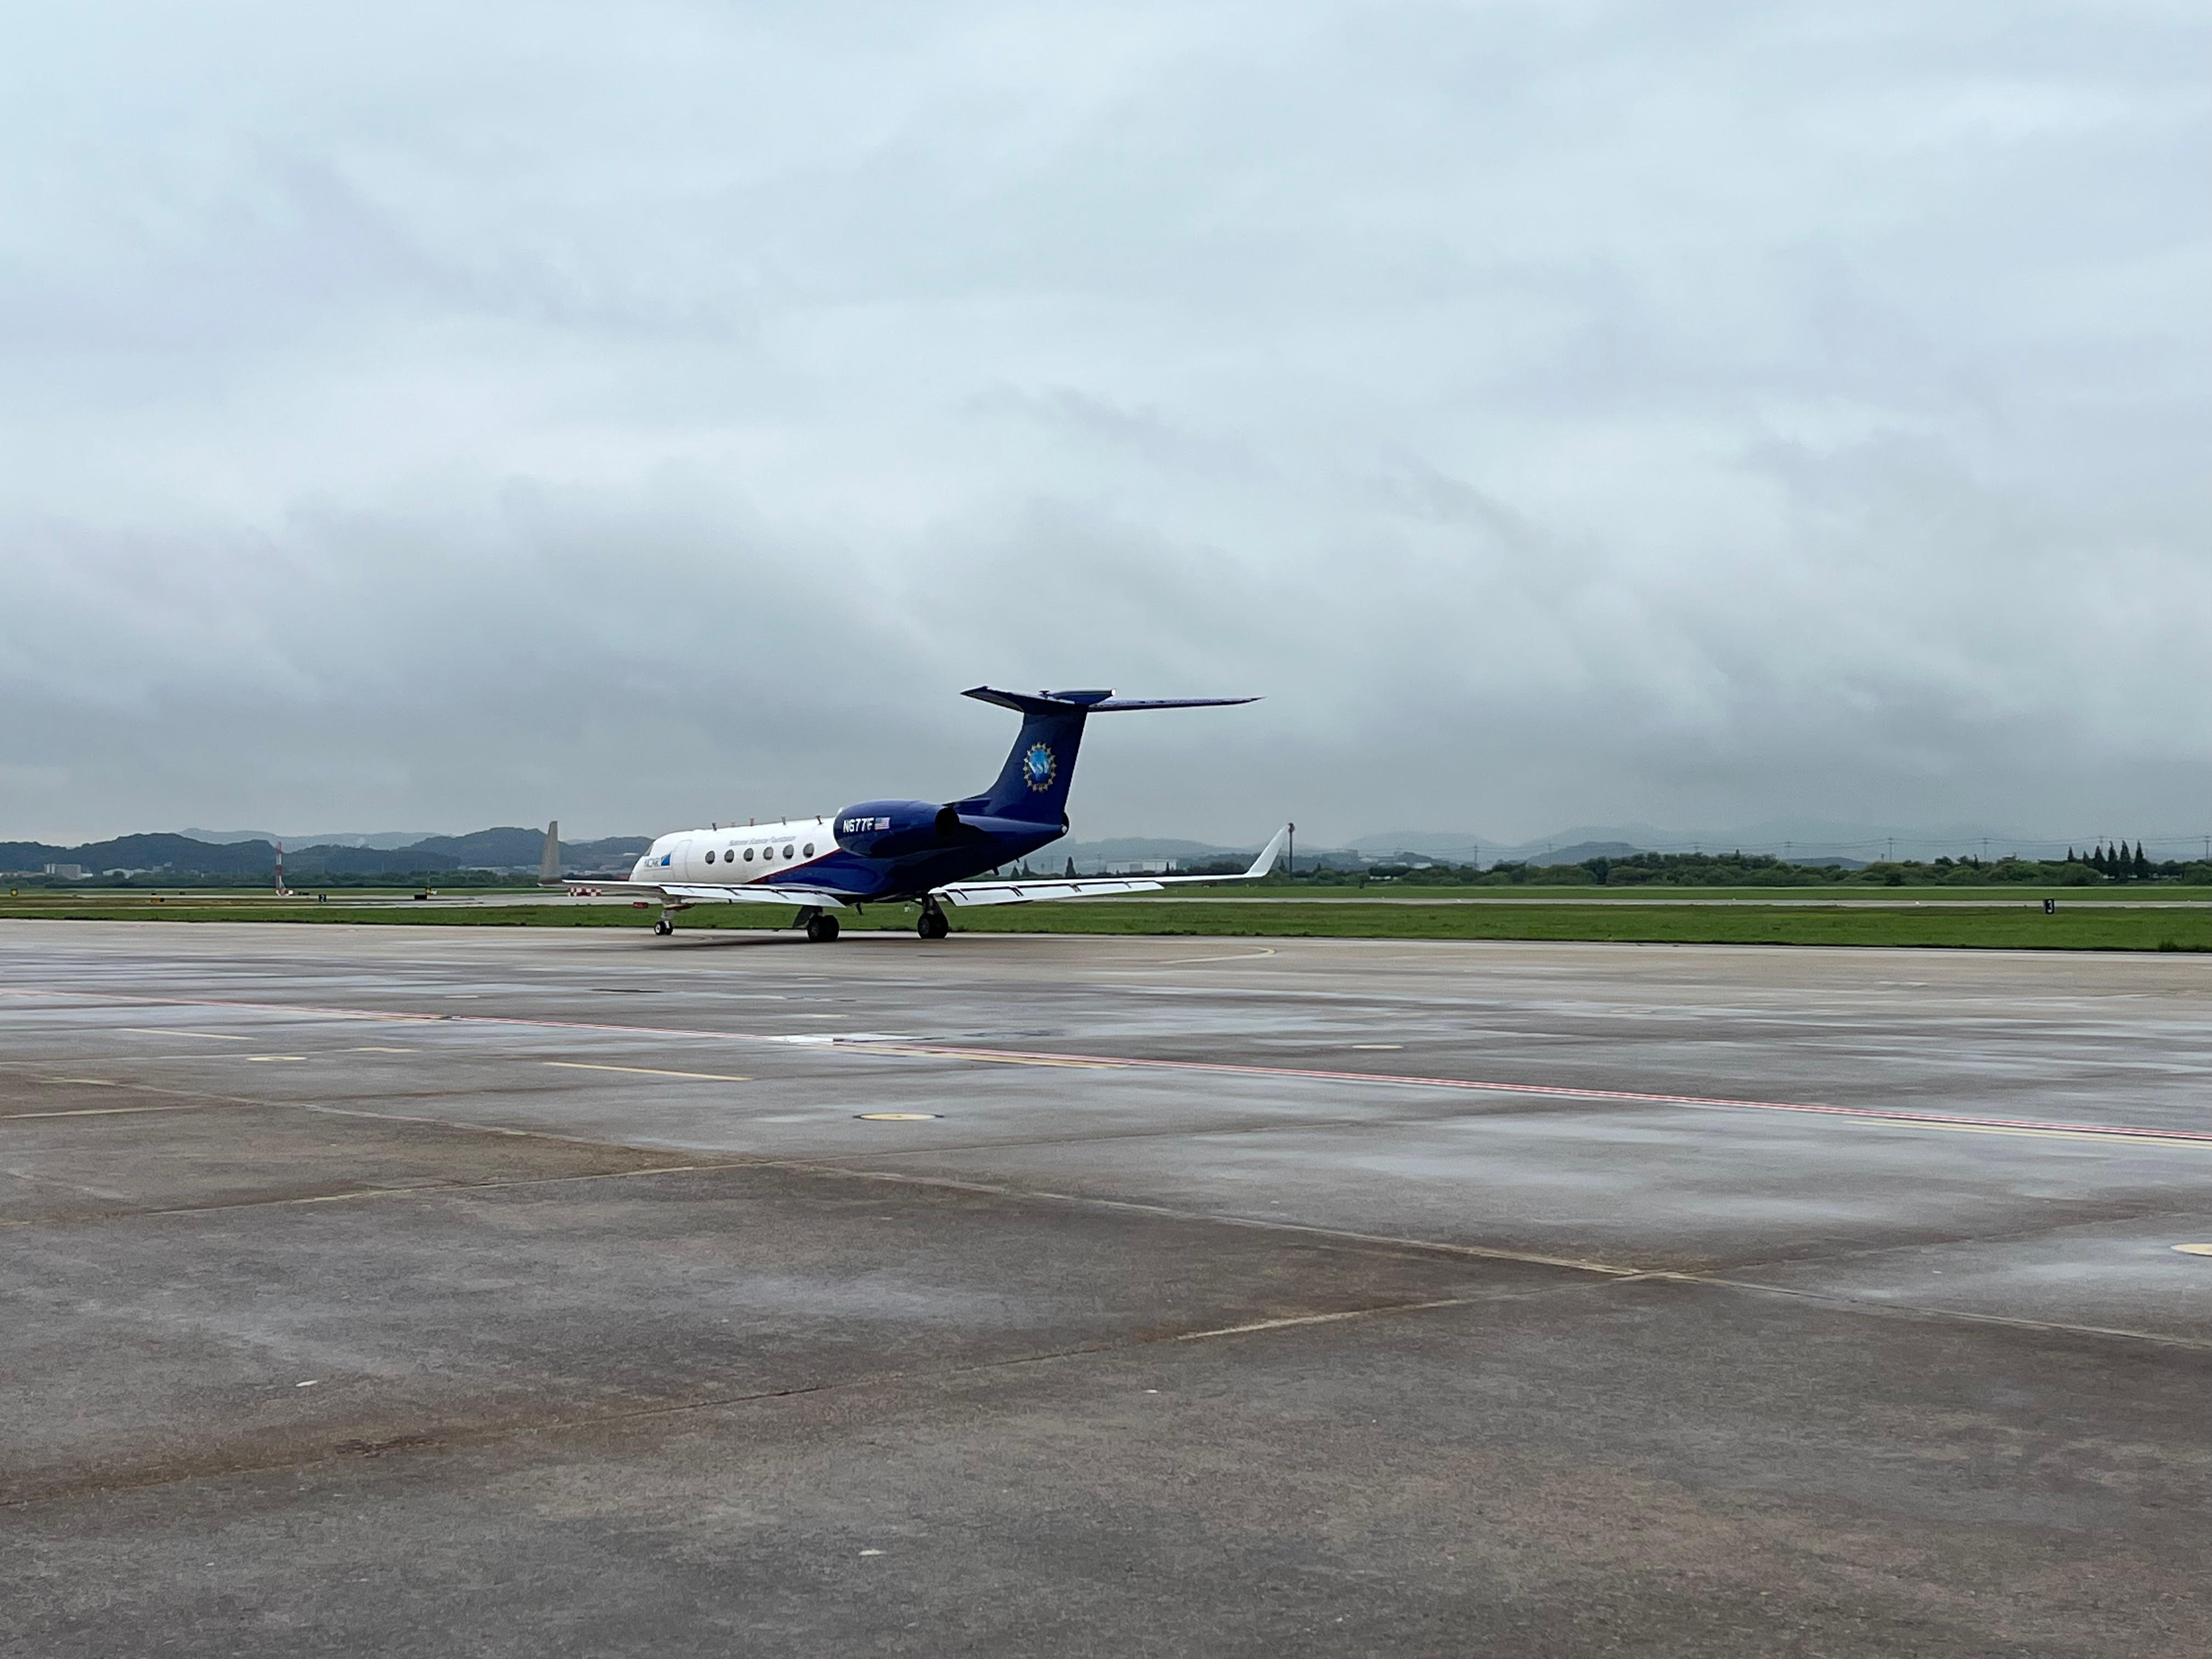 The #ACCLIP final GV research flight took off from #Osan this morning. #NSFfunded #NSFGEO @NCAR_ACOM  @UMiamiRSMAS @ncareol  @NOAA_ESRL   #NASA @NCAR_Science  #AsianSummerMonsoon #AtmosphericChemistry #HIAPER - August 31, 2022 (Laura Pan)